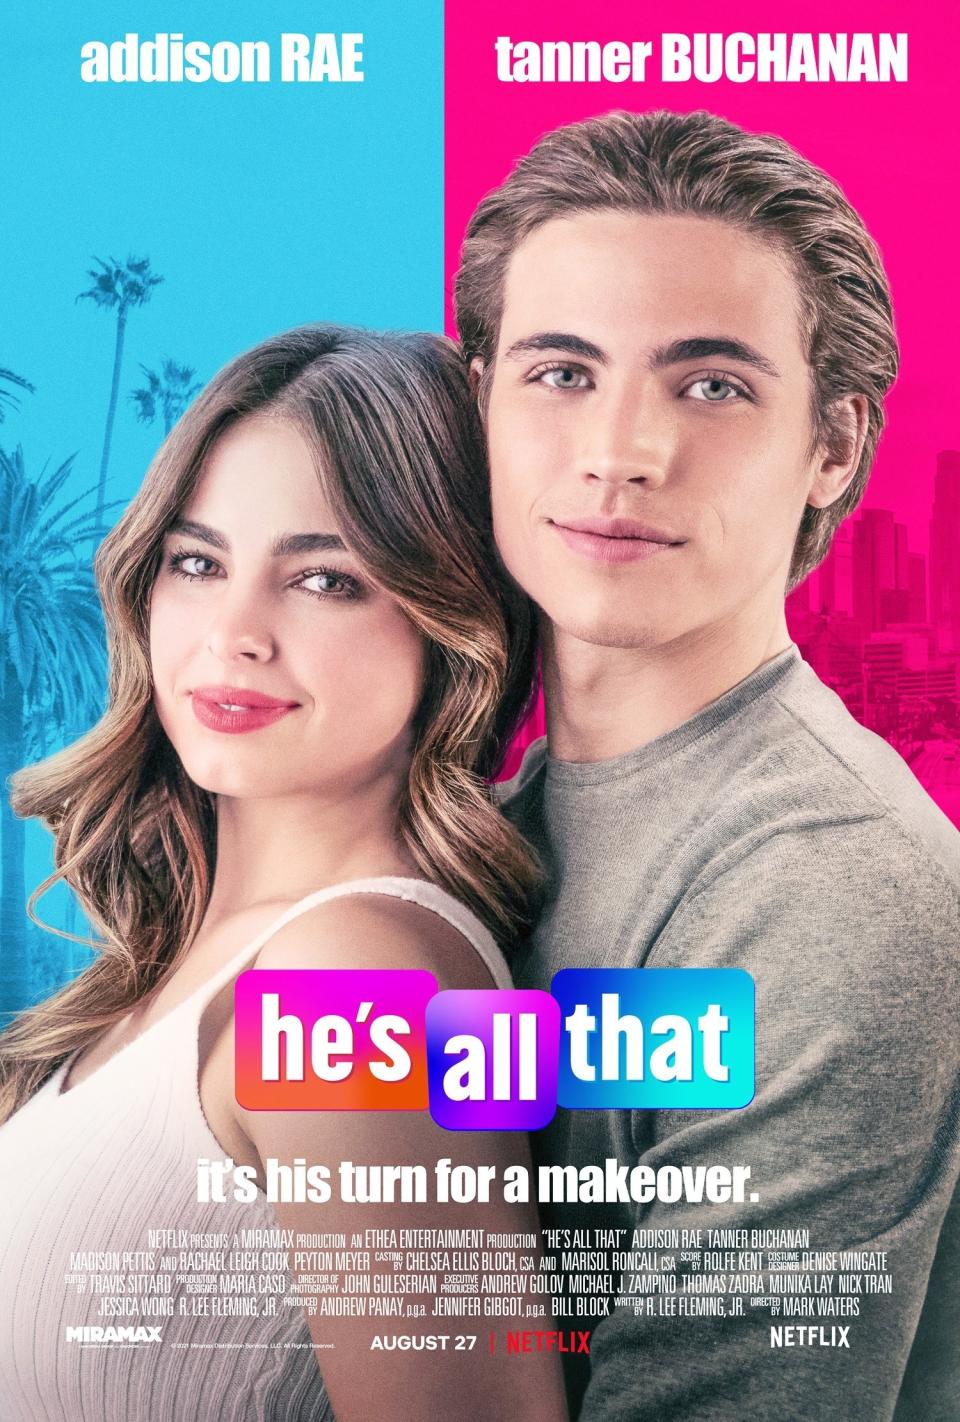 movie poster for "He's All That" starring Addison Rae